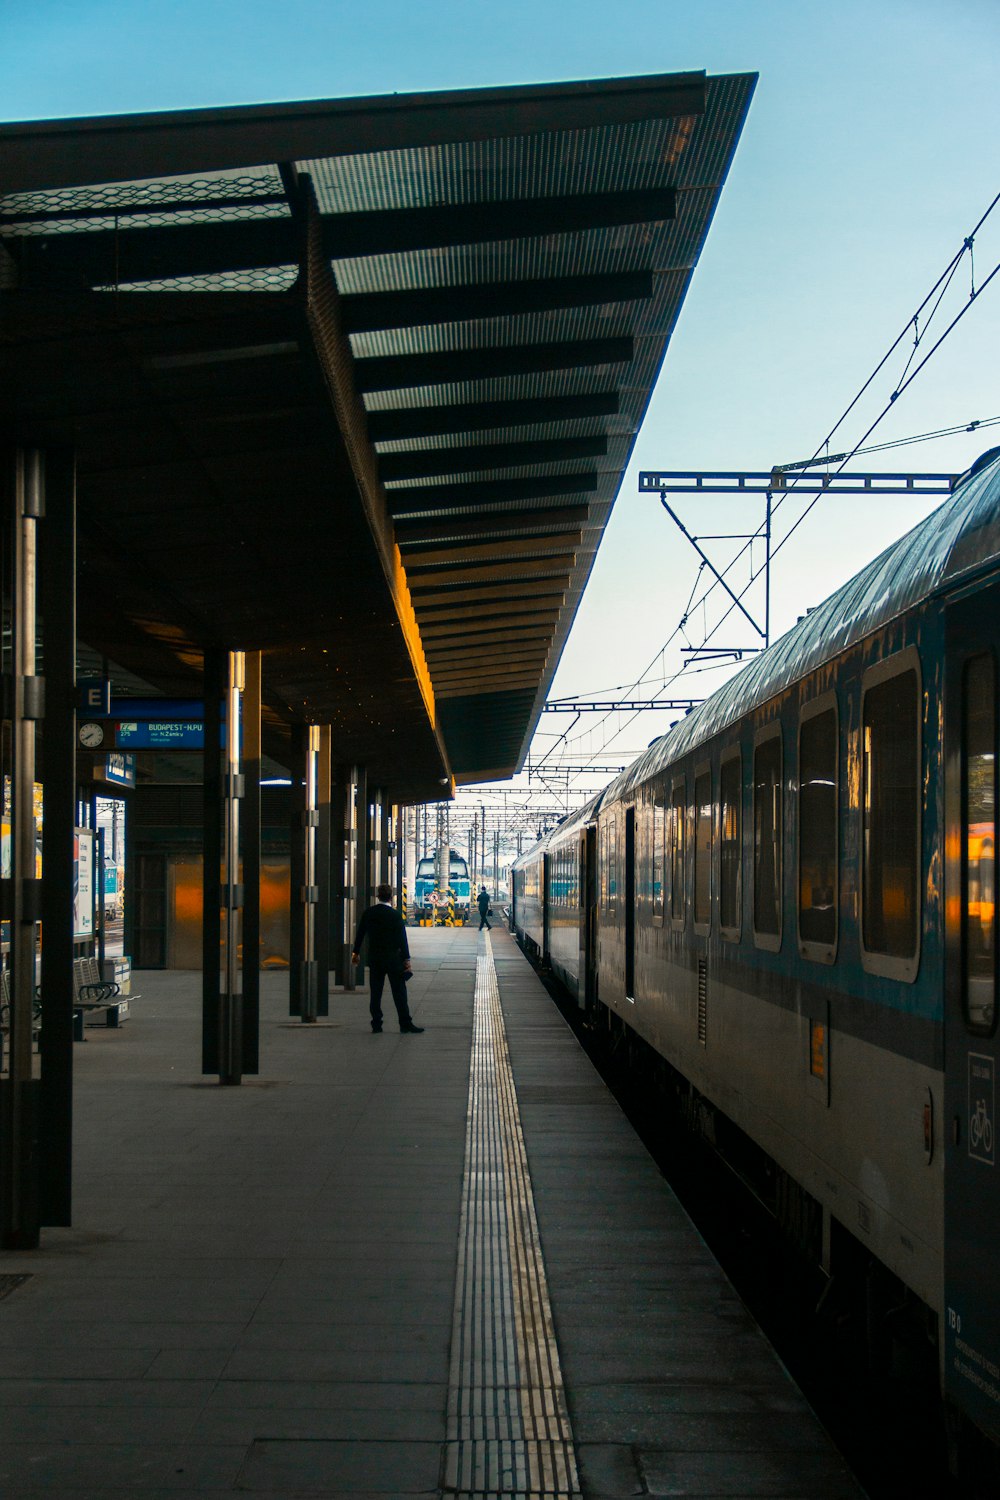 blue and yellow train in train station